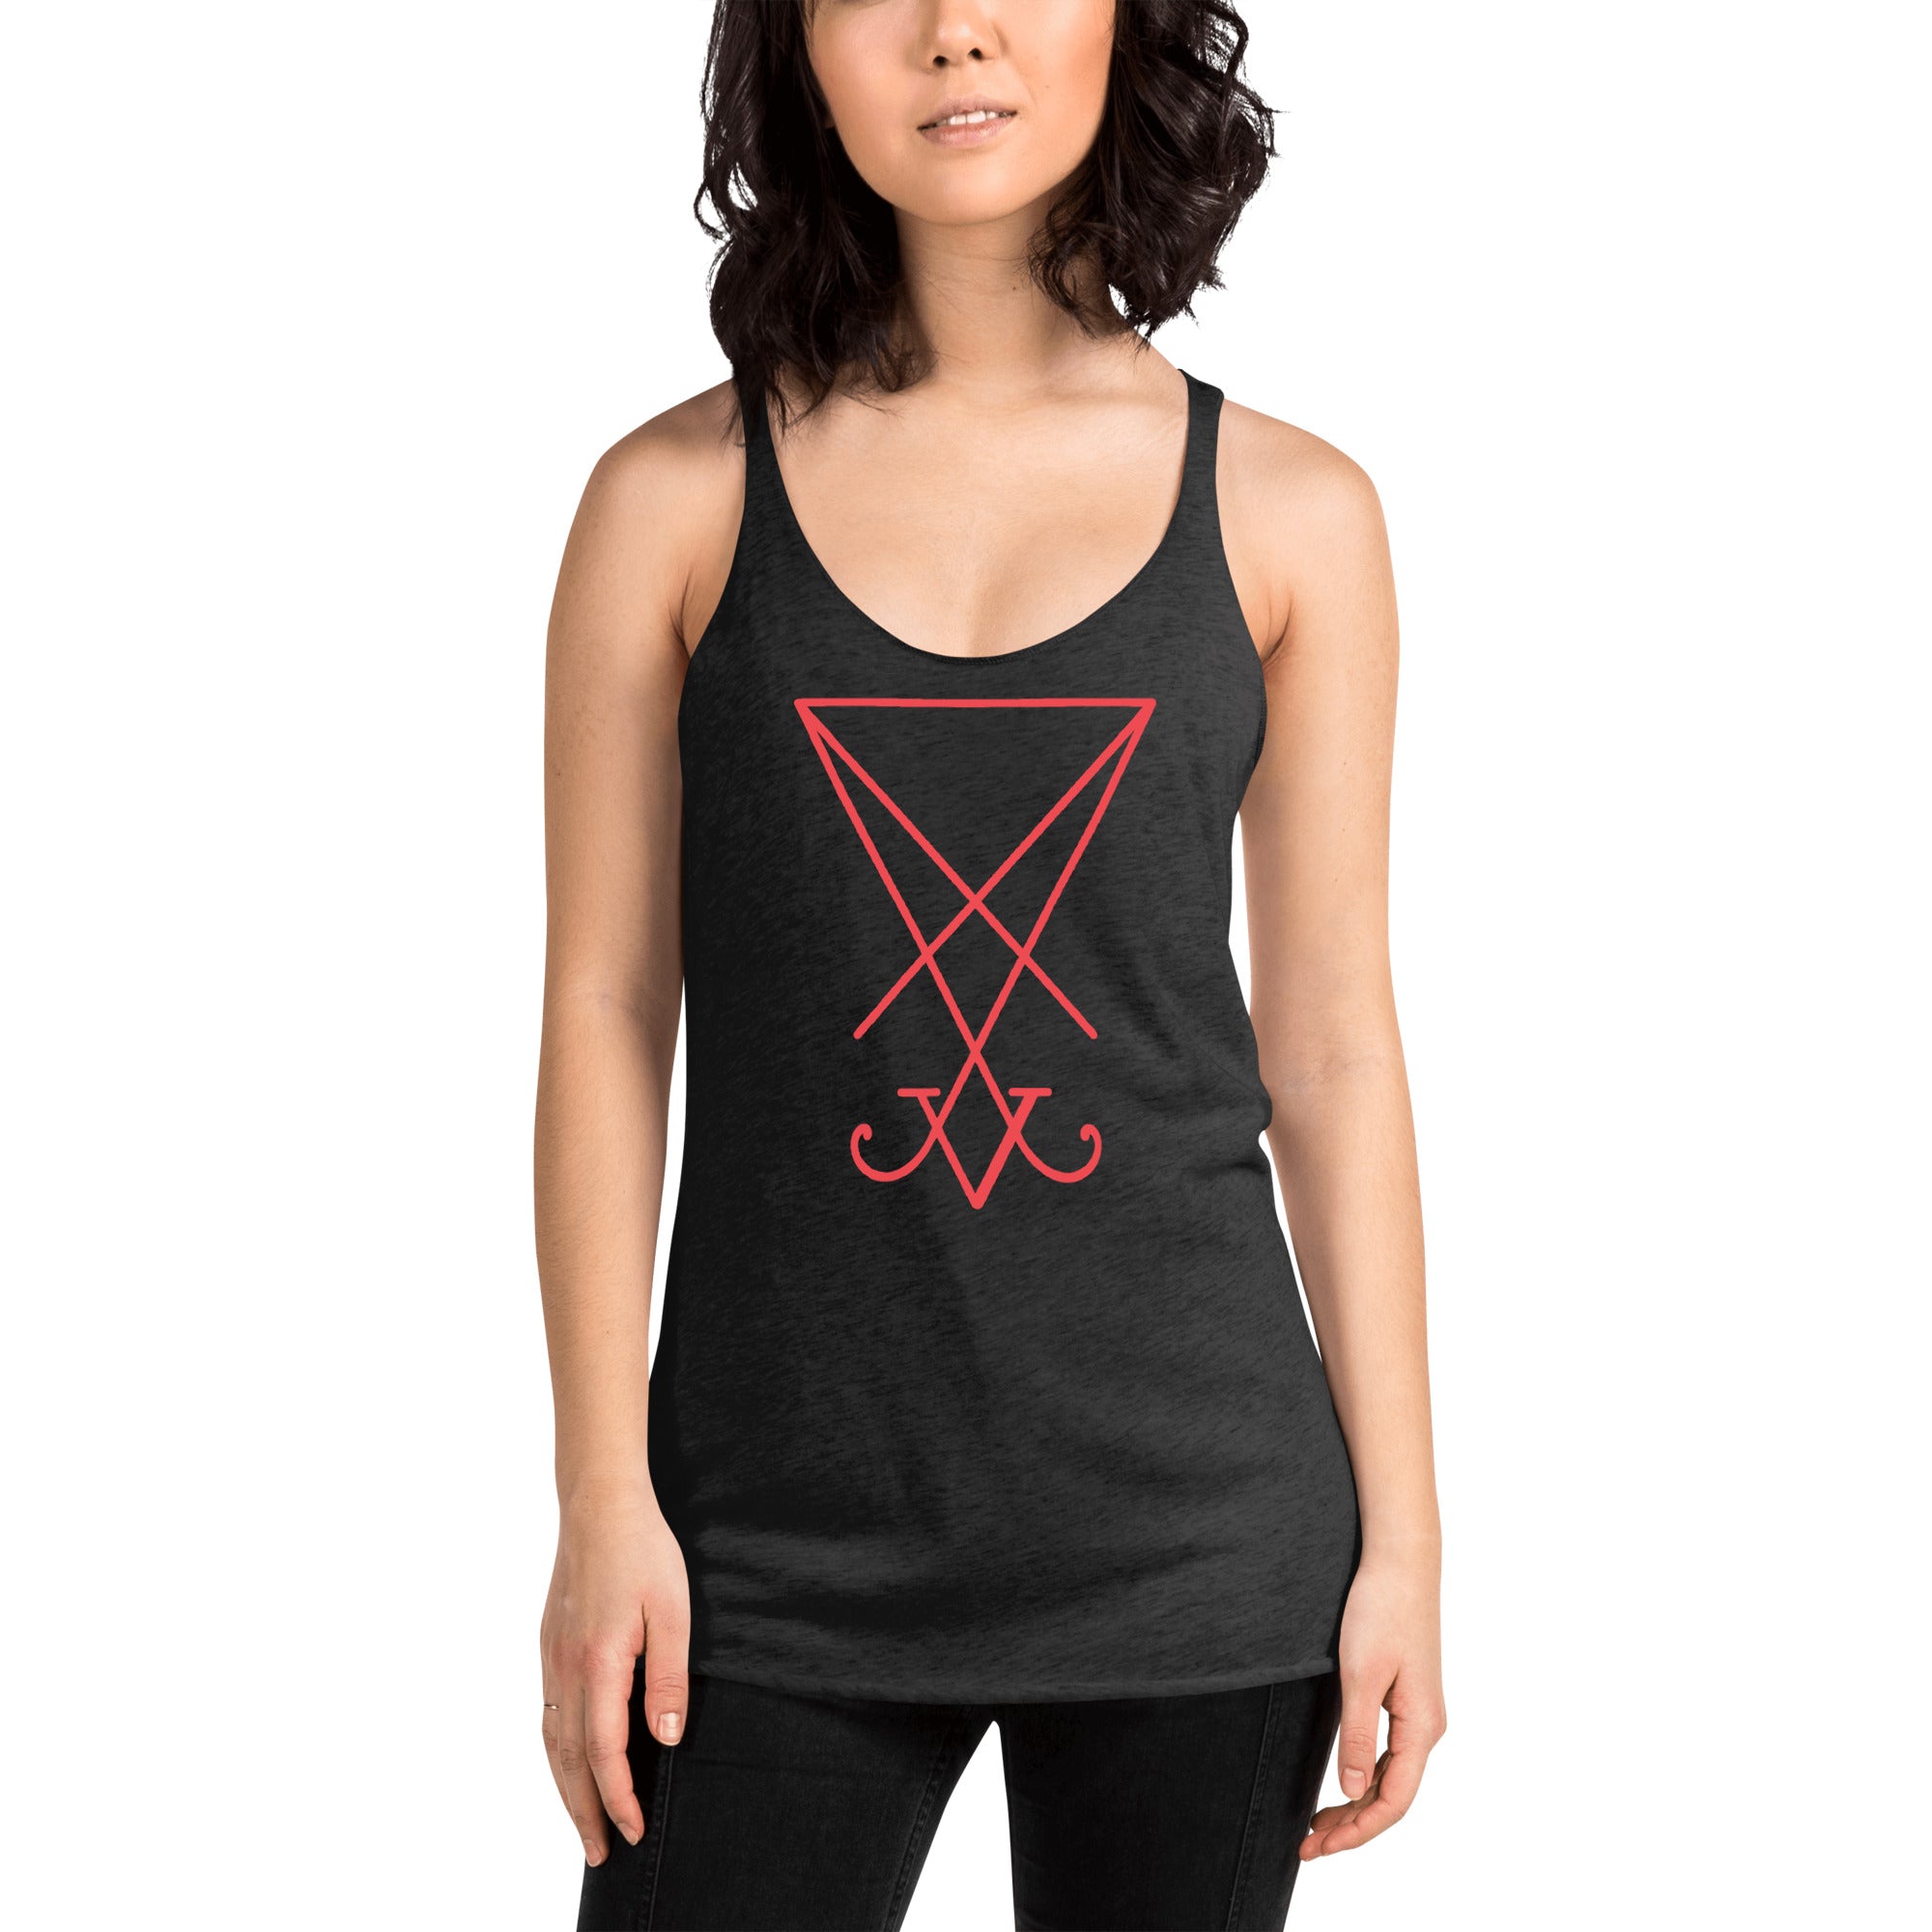 Red Sigil of Lucifer (Seal of Satan) The Grimoire of Truth Women's Racerback Tank Top Shirt